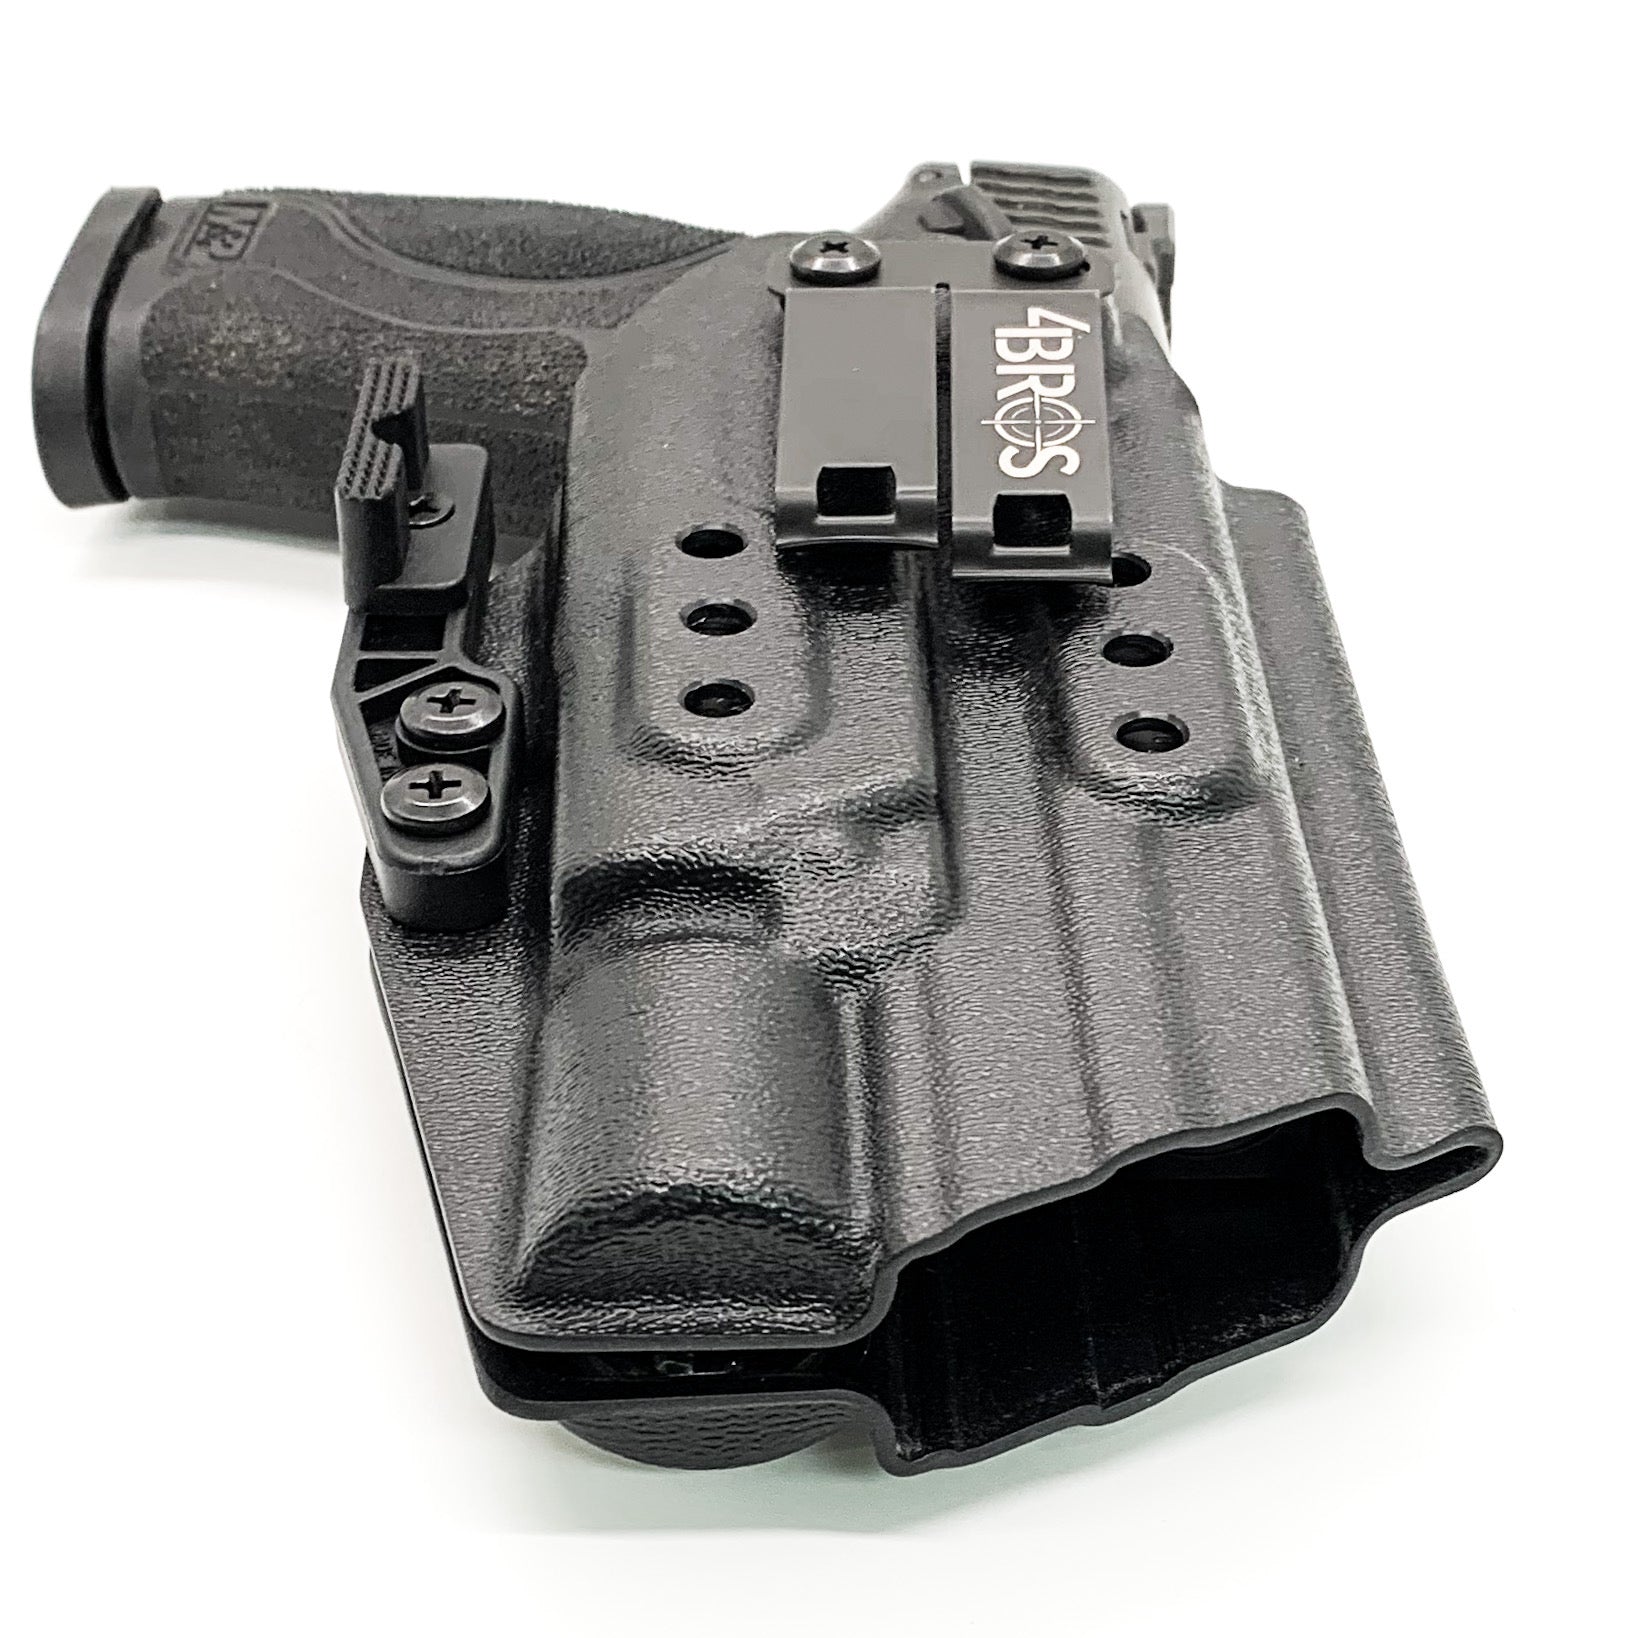 For the best Inside Waistband IWB AIWB Holster designed to fit the Smith and Wesson M&P 10MM  4 or 4.6" M2.0 pistol with thumb safety & Surefire X300U-A, X300U-B, X-300T-A, or X-300T-B weapon light, shop four brothers.  Full sweat guard, adjustable retention, cleared for a red dot sight. Made in the USA.  